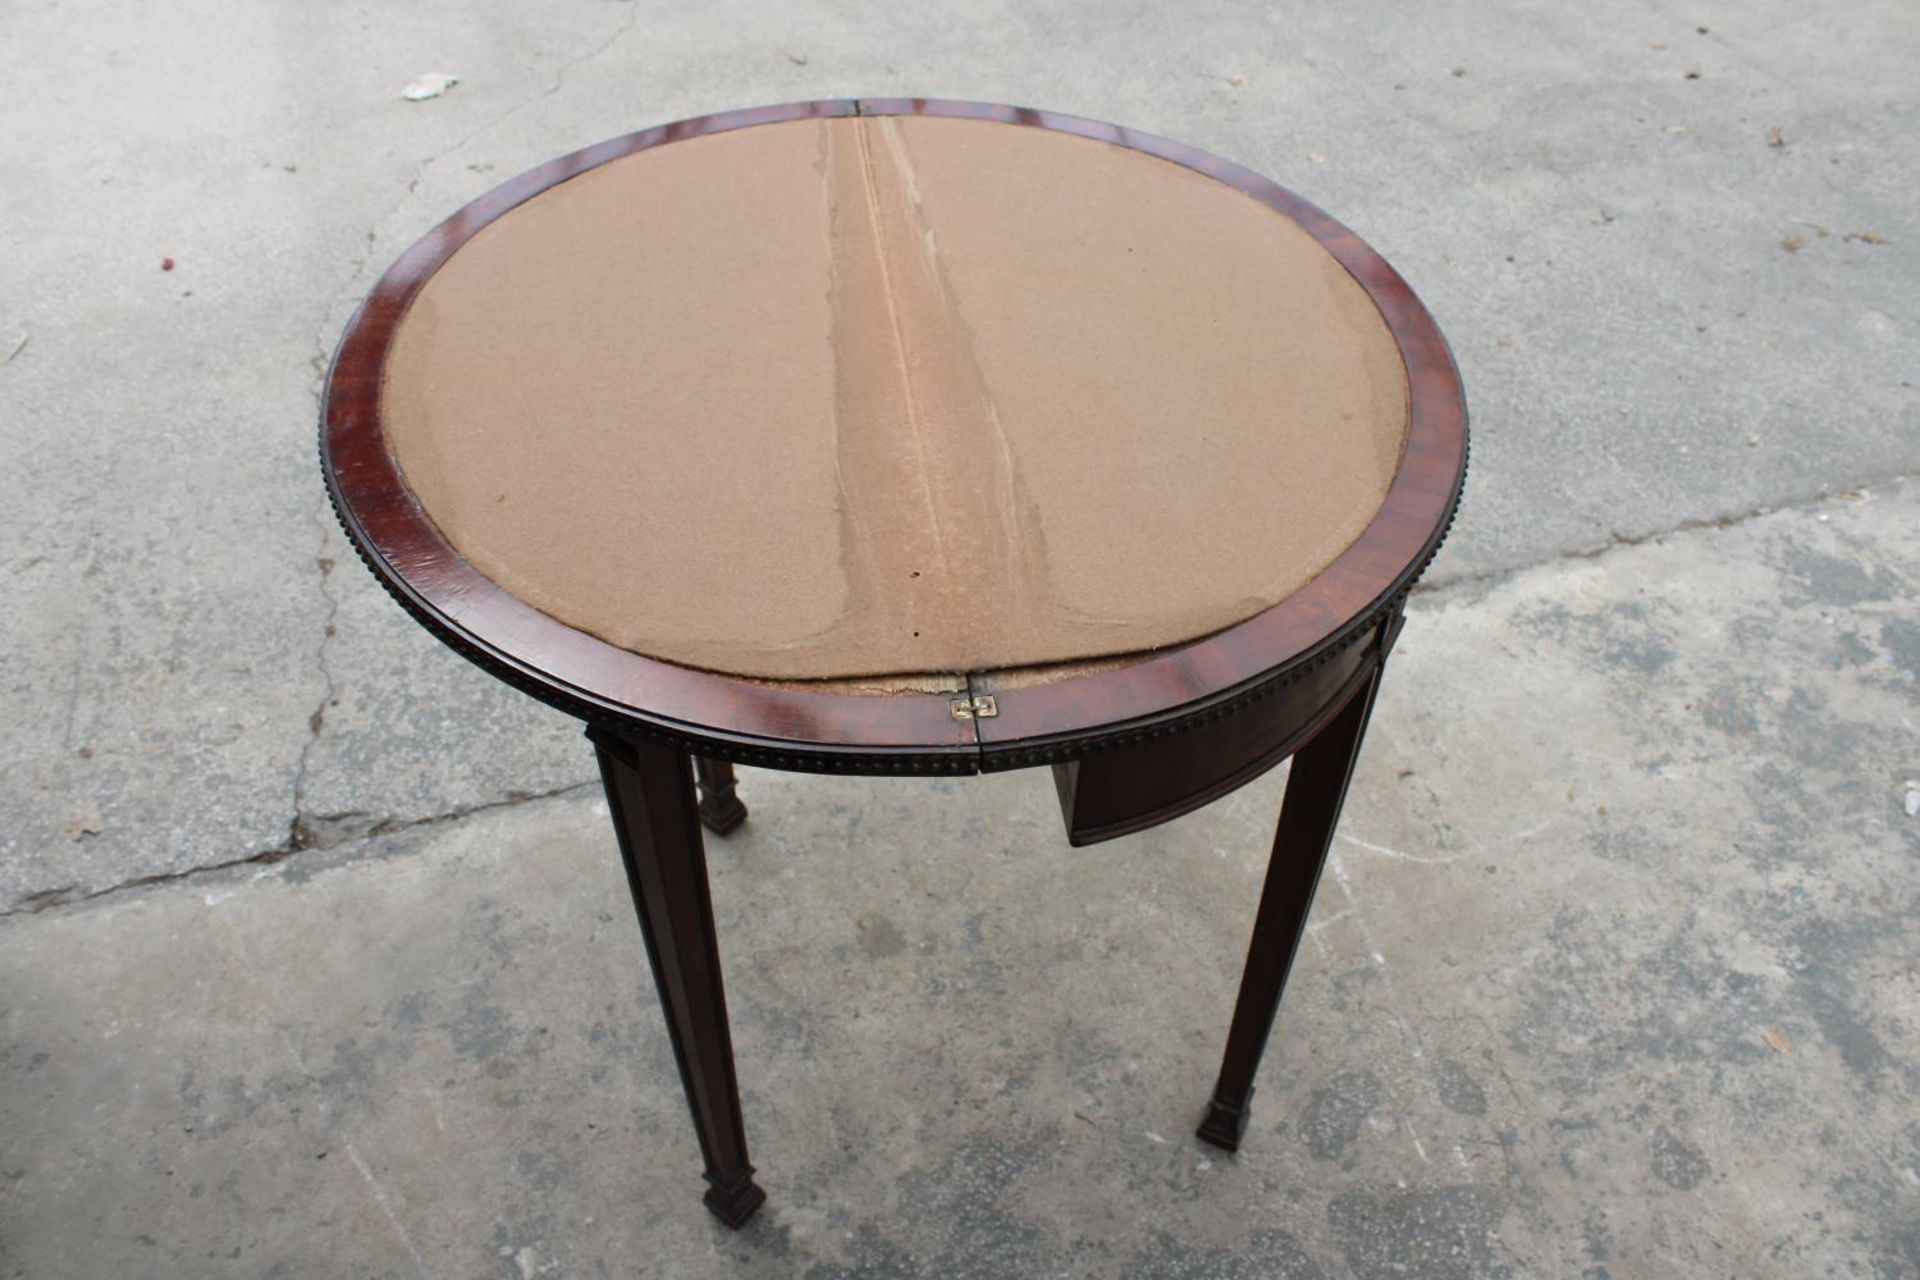 A 19TH CENTURY STYLE DEMI-LUNE GAMES TABLE, POSSIBLY BY WARING AND GILLOW, 28" WIDE - Image 3 of 6